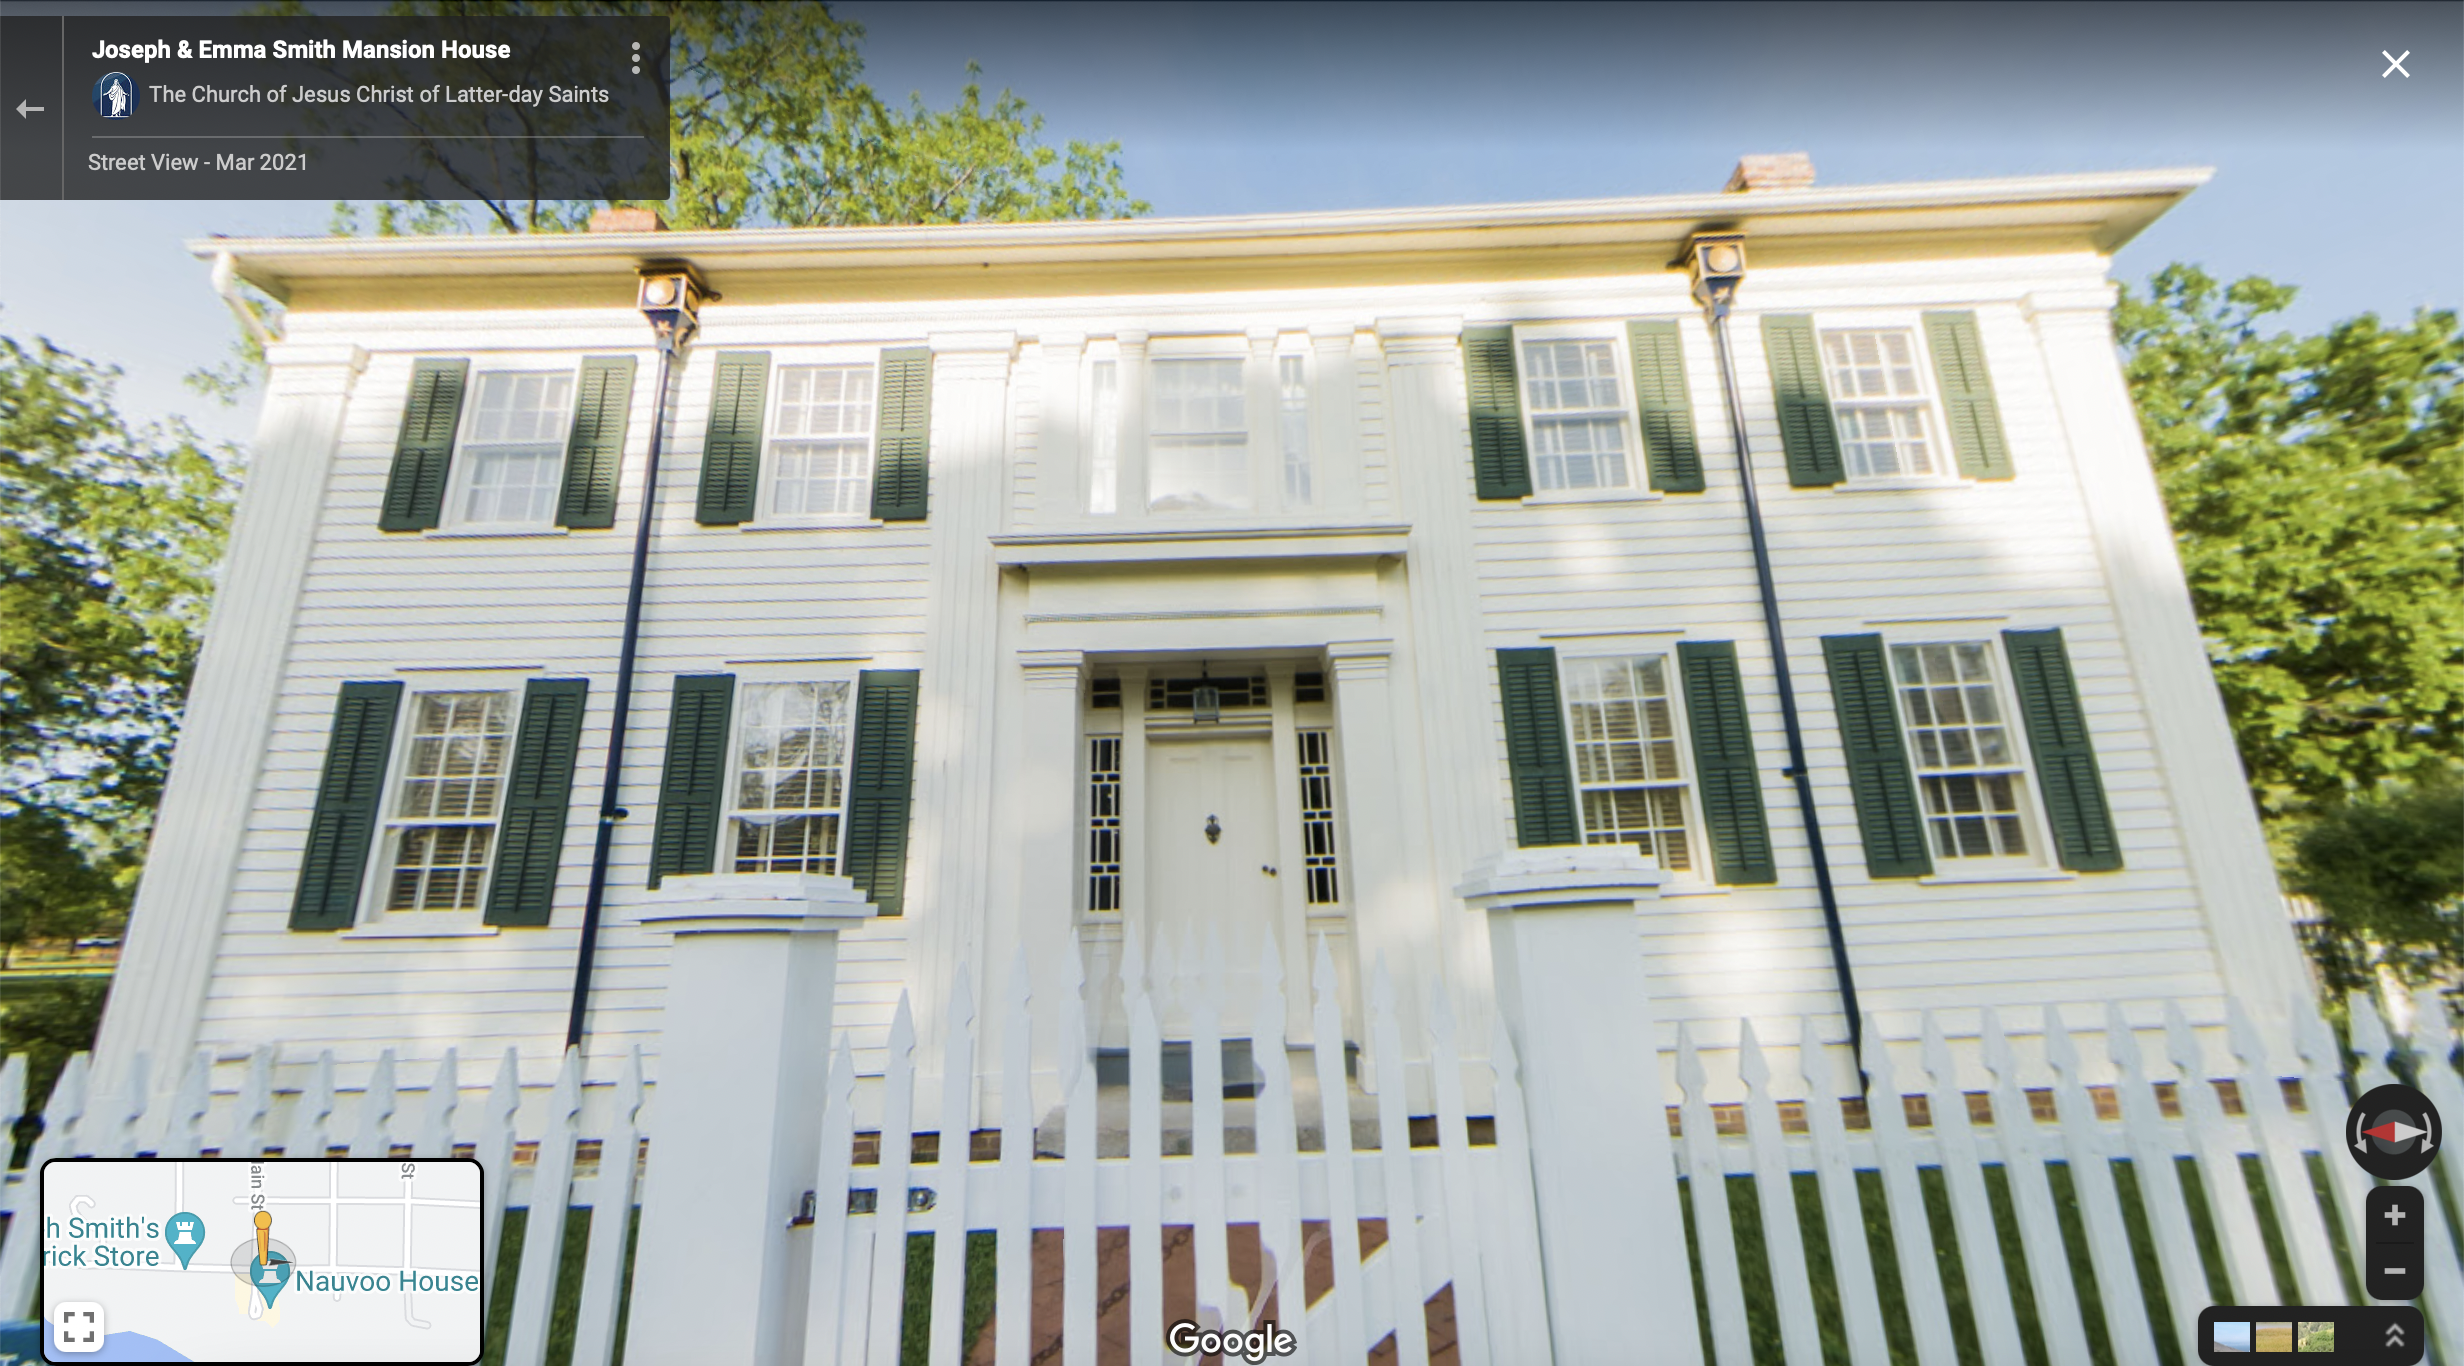 Screenshot of the Google Maps 360 view of the Mansion House in Nauvoo